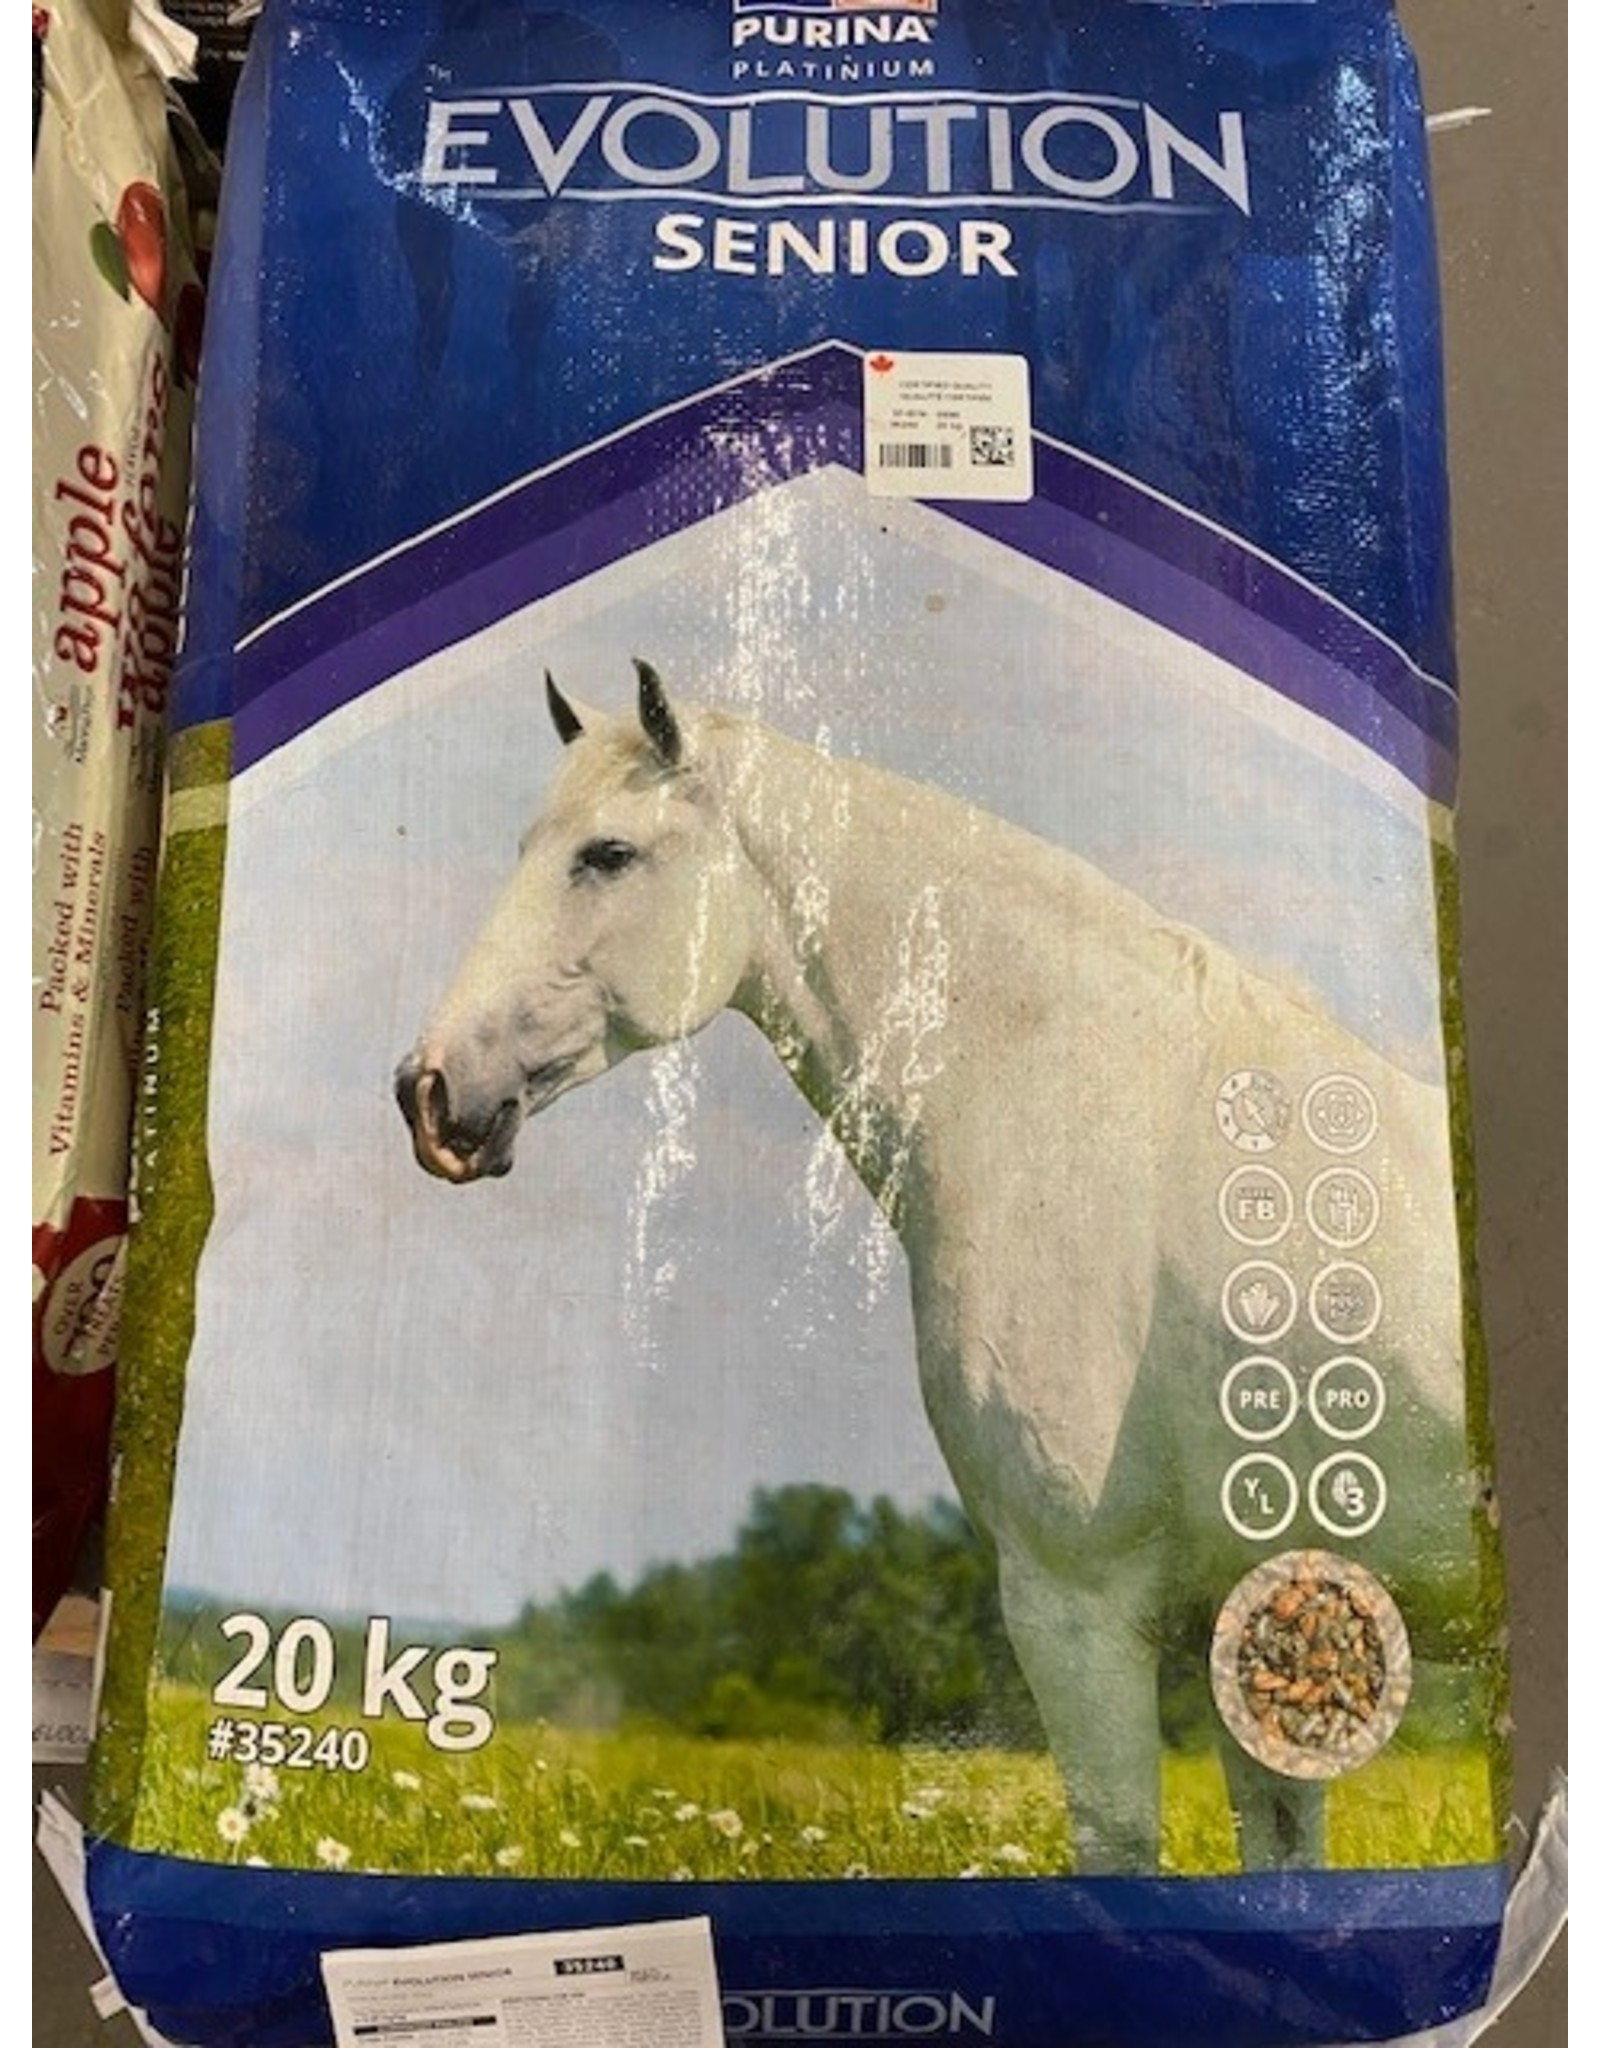 Purina PURINA EVOLUTION SENIOR - 20KG  - CP35240  - NSC 18% - CP 14%, Fat 6%, Fiber 16% - Low glycemic, multiparticle feed (contains pelleted and extruded components) for senior horses >15 years of age